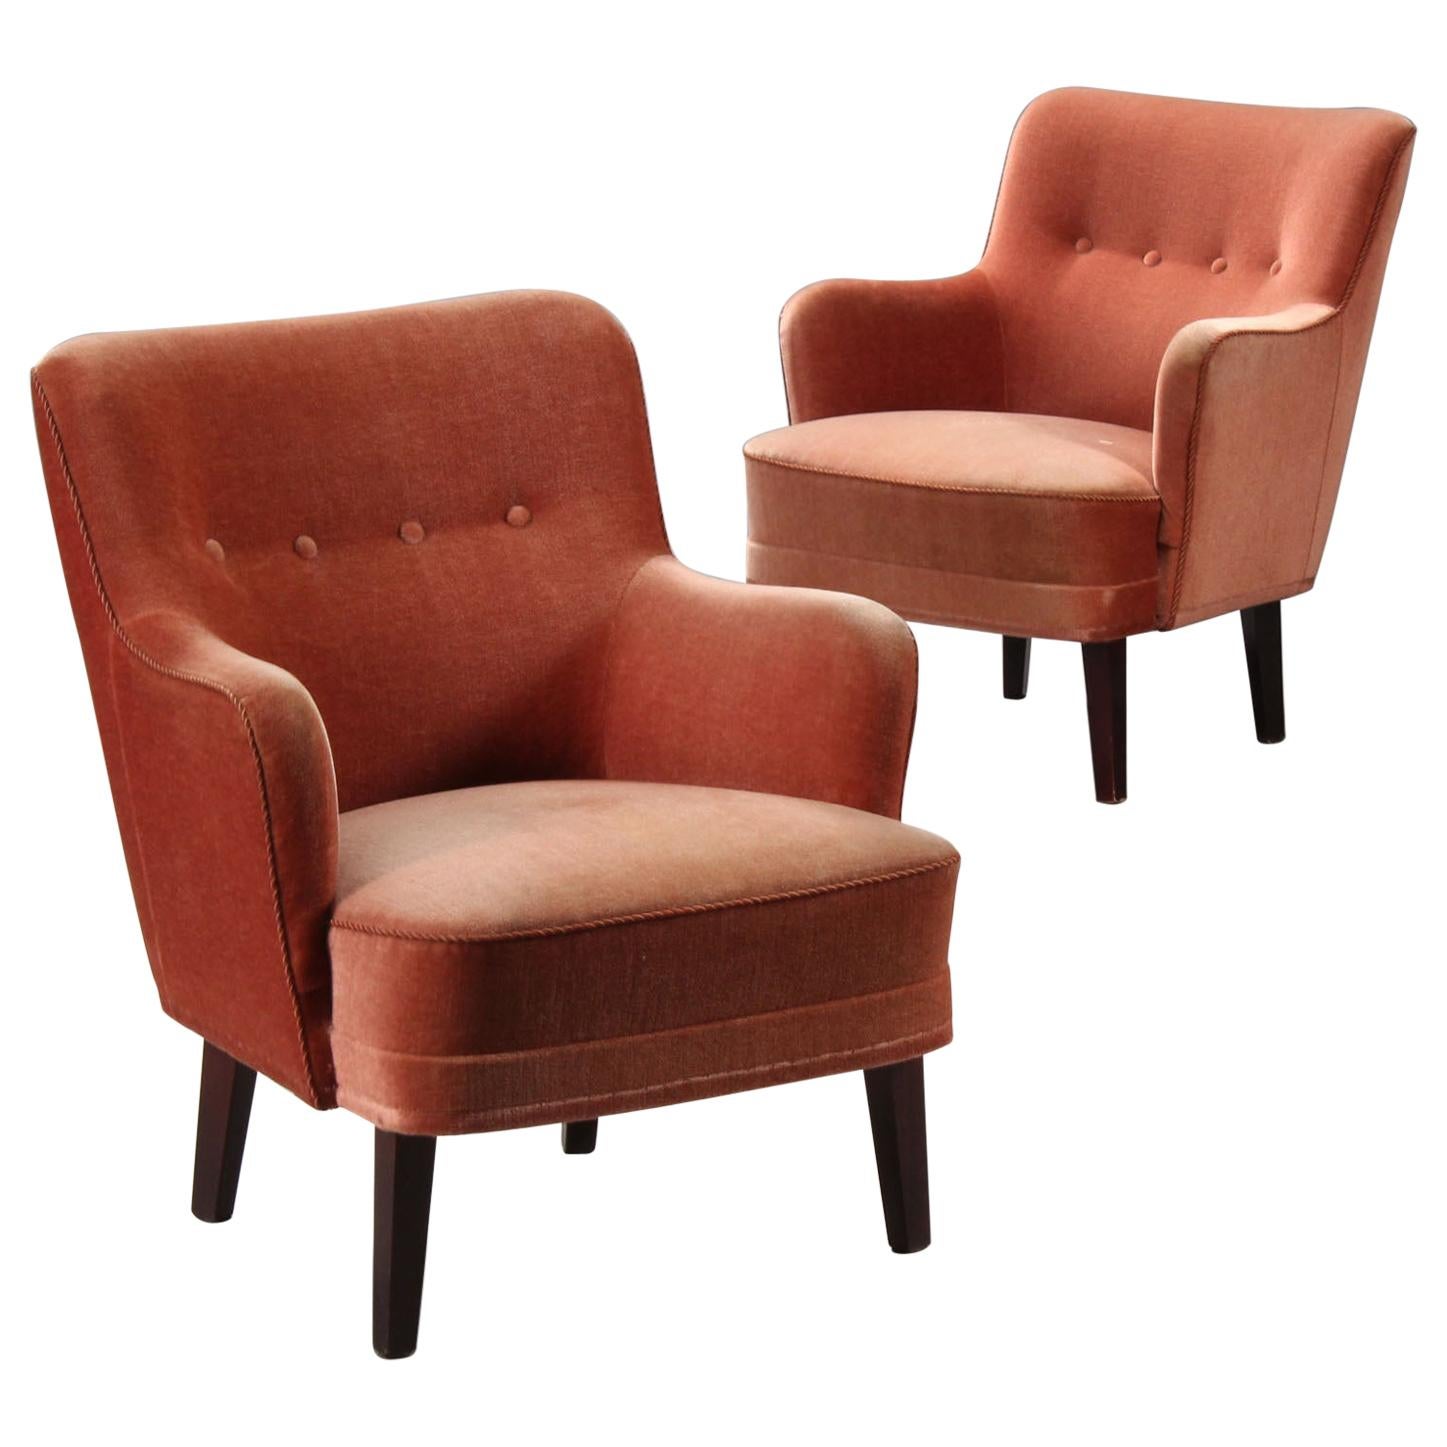 Pair of Small Rose-Colored Armchairs